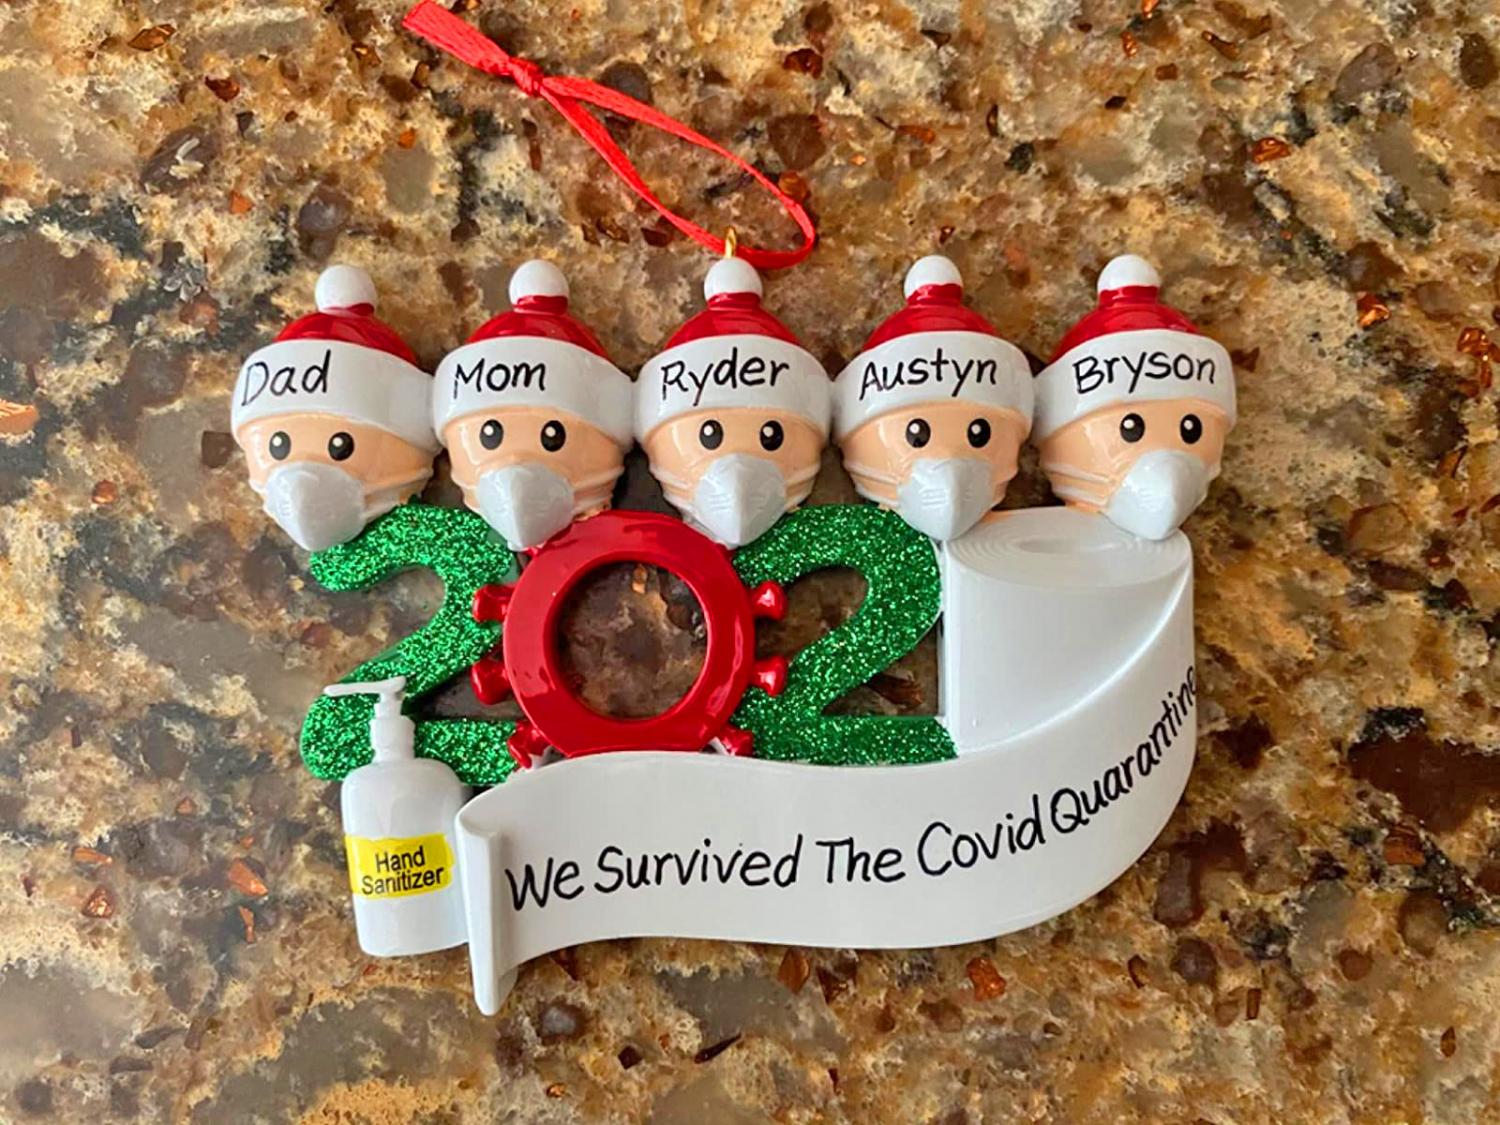 Family Christmas Hanging Ornaments for Christmas Tree Home Decor Xmas Gifts 2020 Covid Quarantine Christmas Decorations Sale Clearance Baubles Little Men Wear Face Mask PVC Material 